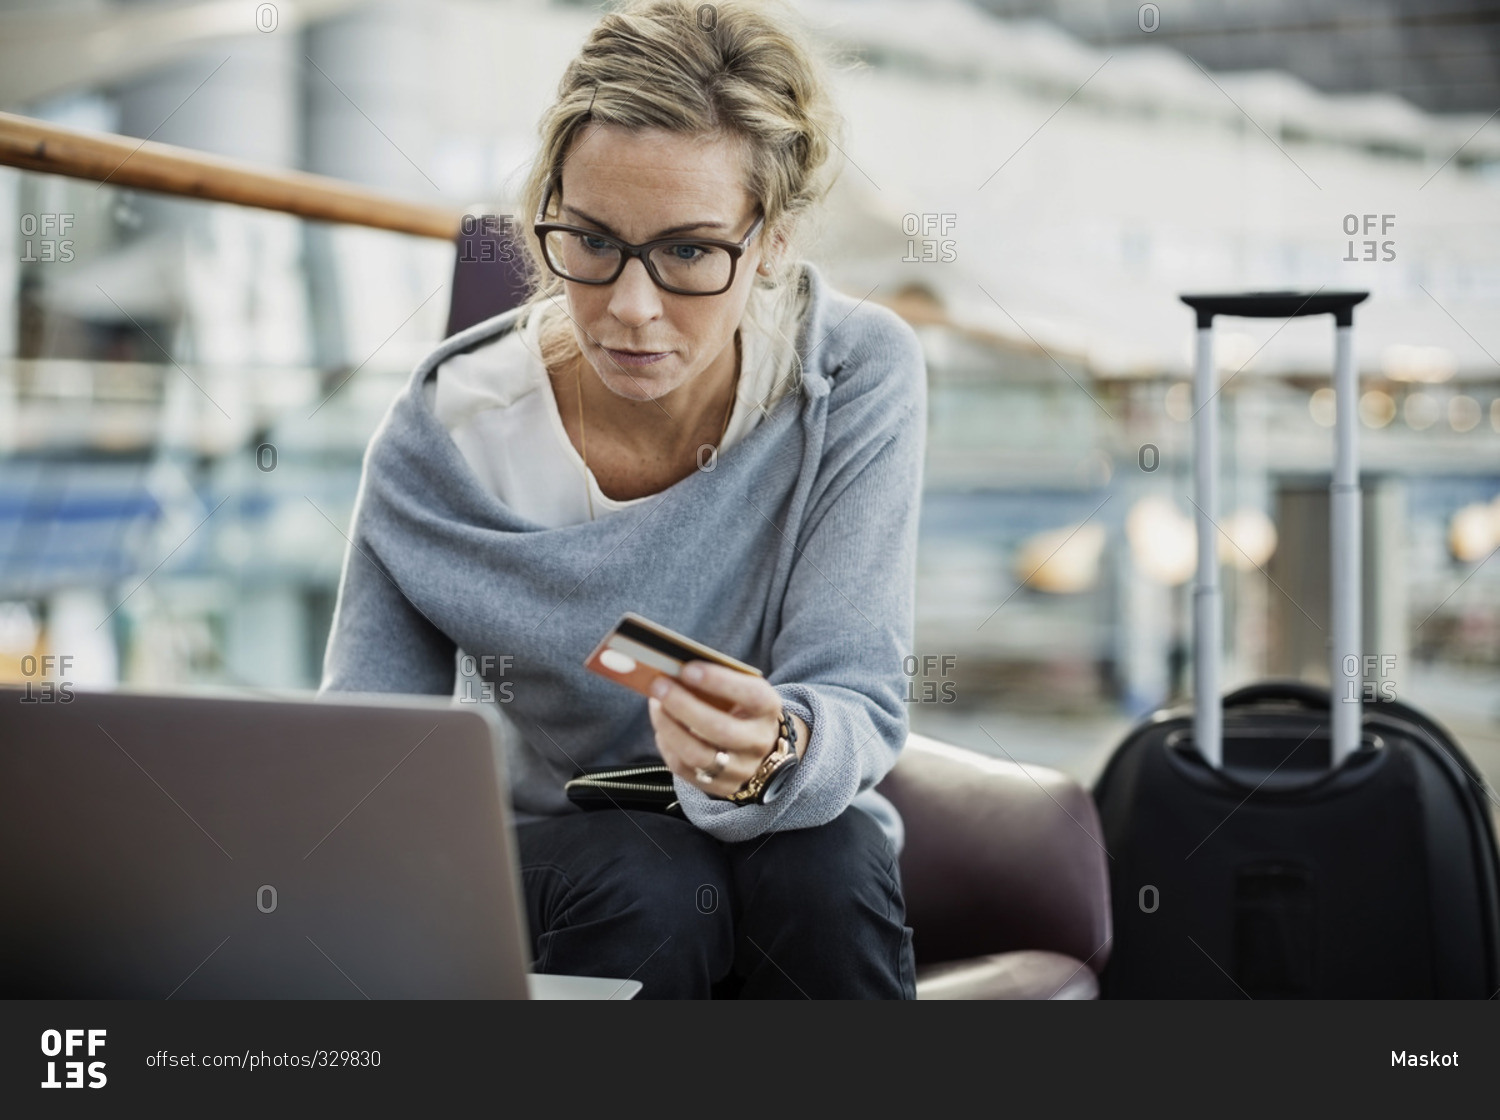 Businesswoman using credit card and laptop at airport lobby